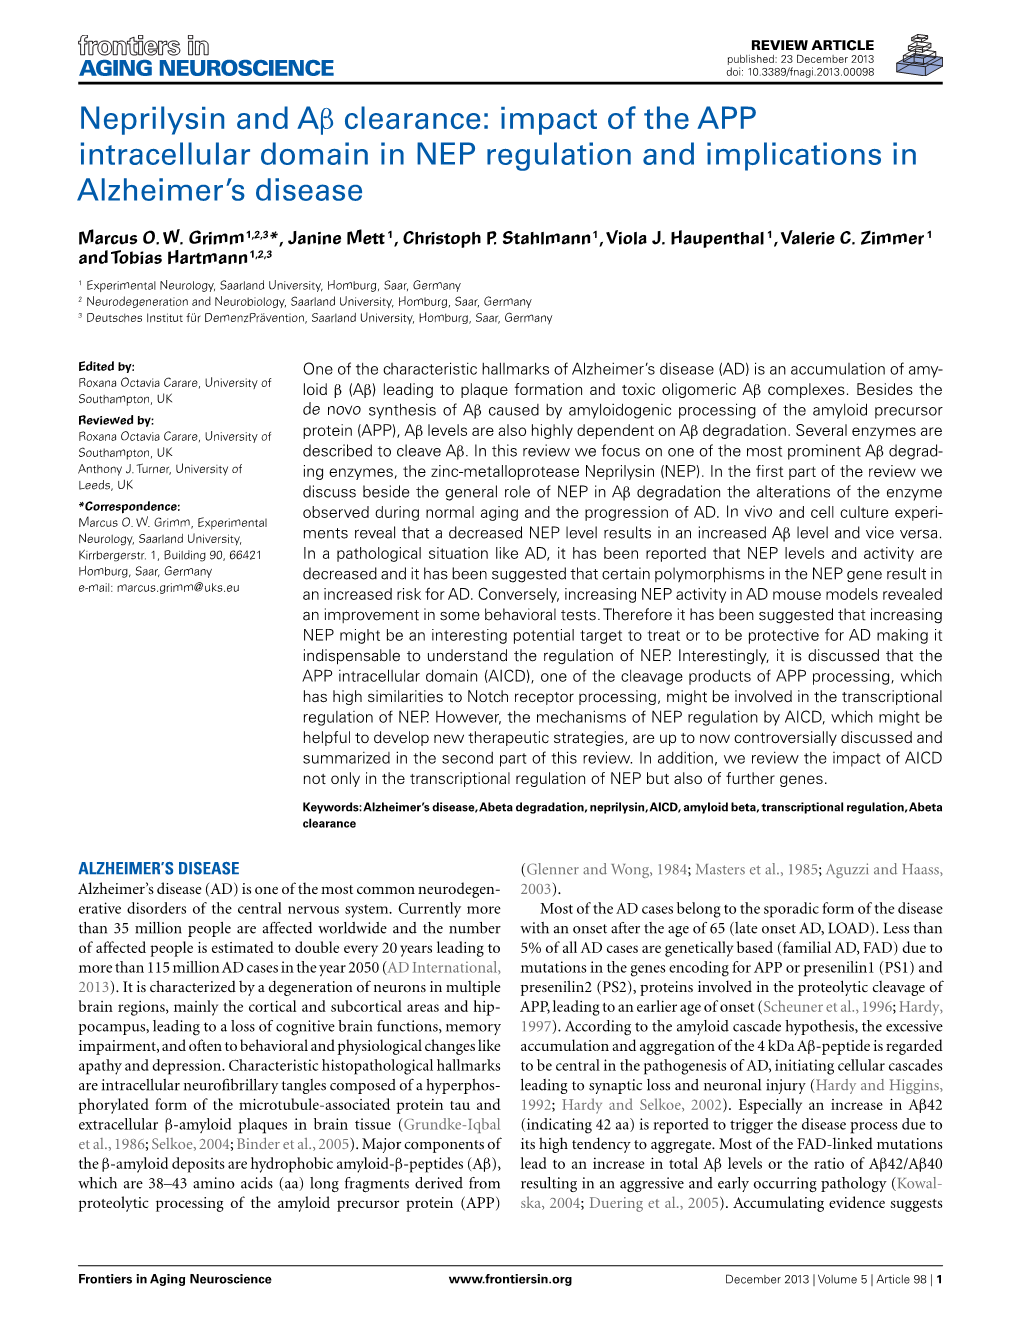 Neprilysin and Aβ Clearance: Impact of the APP Intracellular Domain in NEP Regulation and Implications in Alzheimer’S Disease